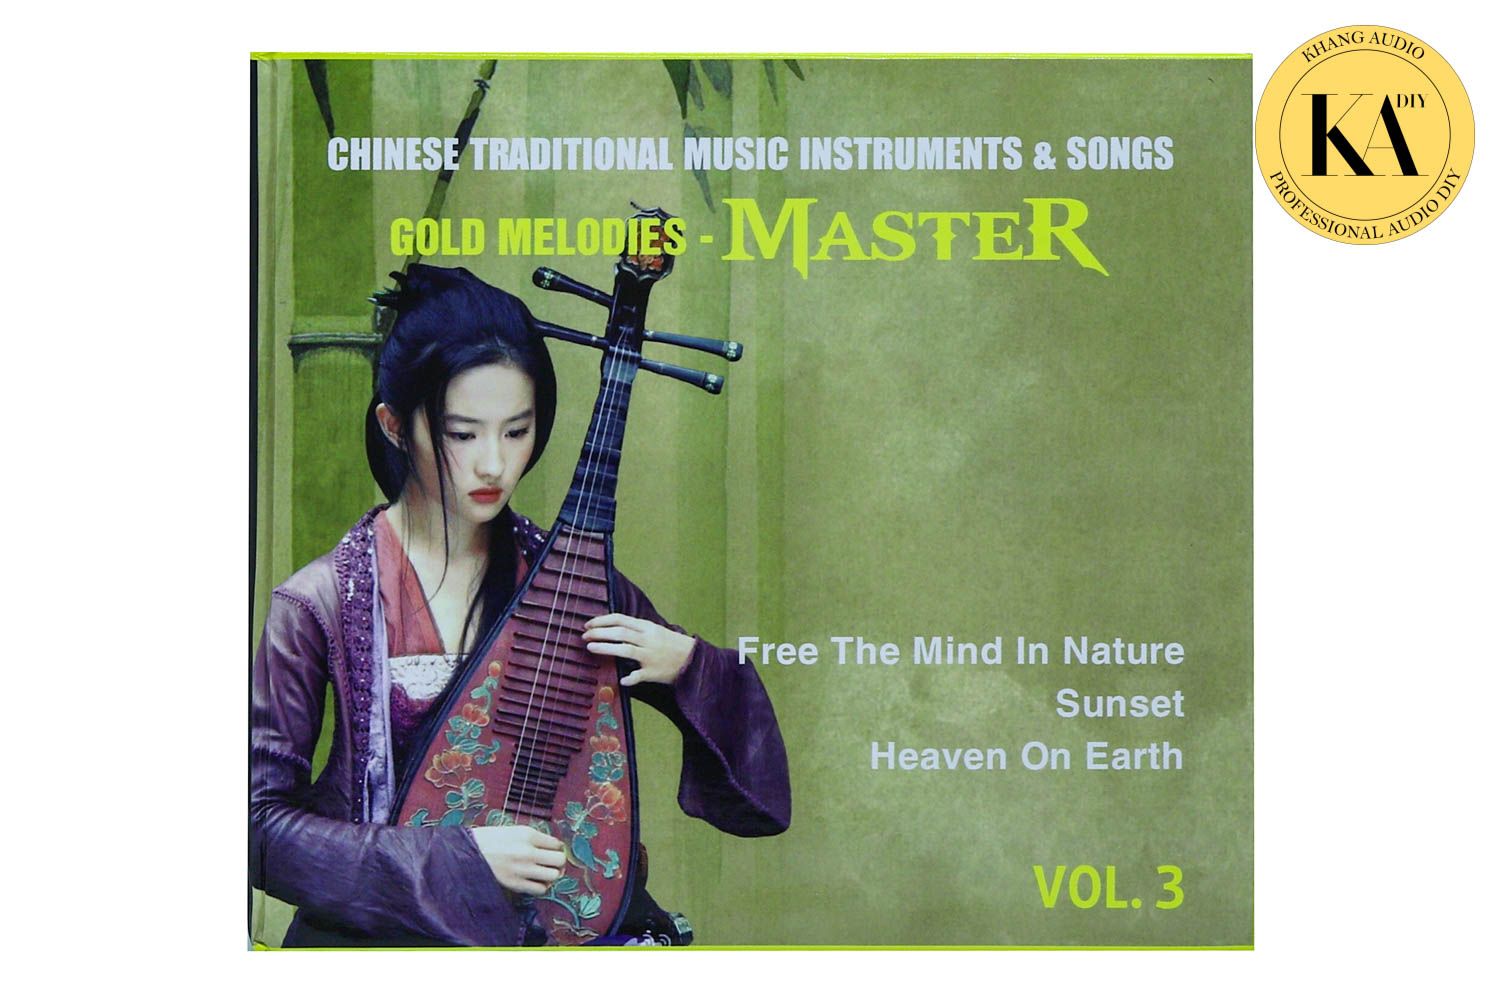 Gold Melodies - Master Vol.3